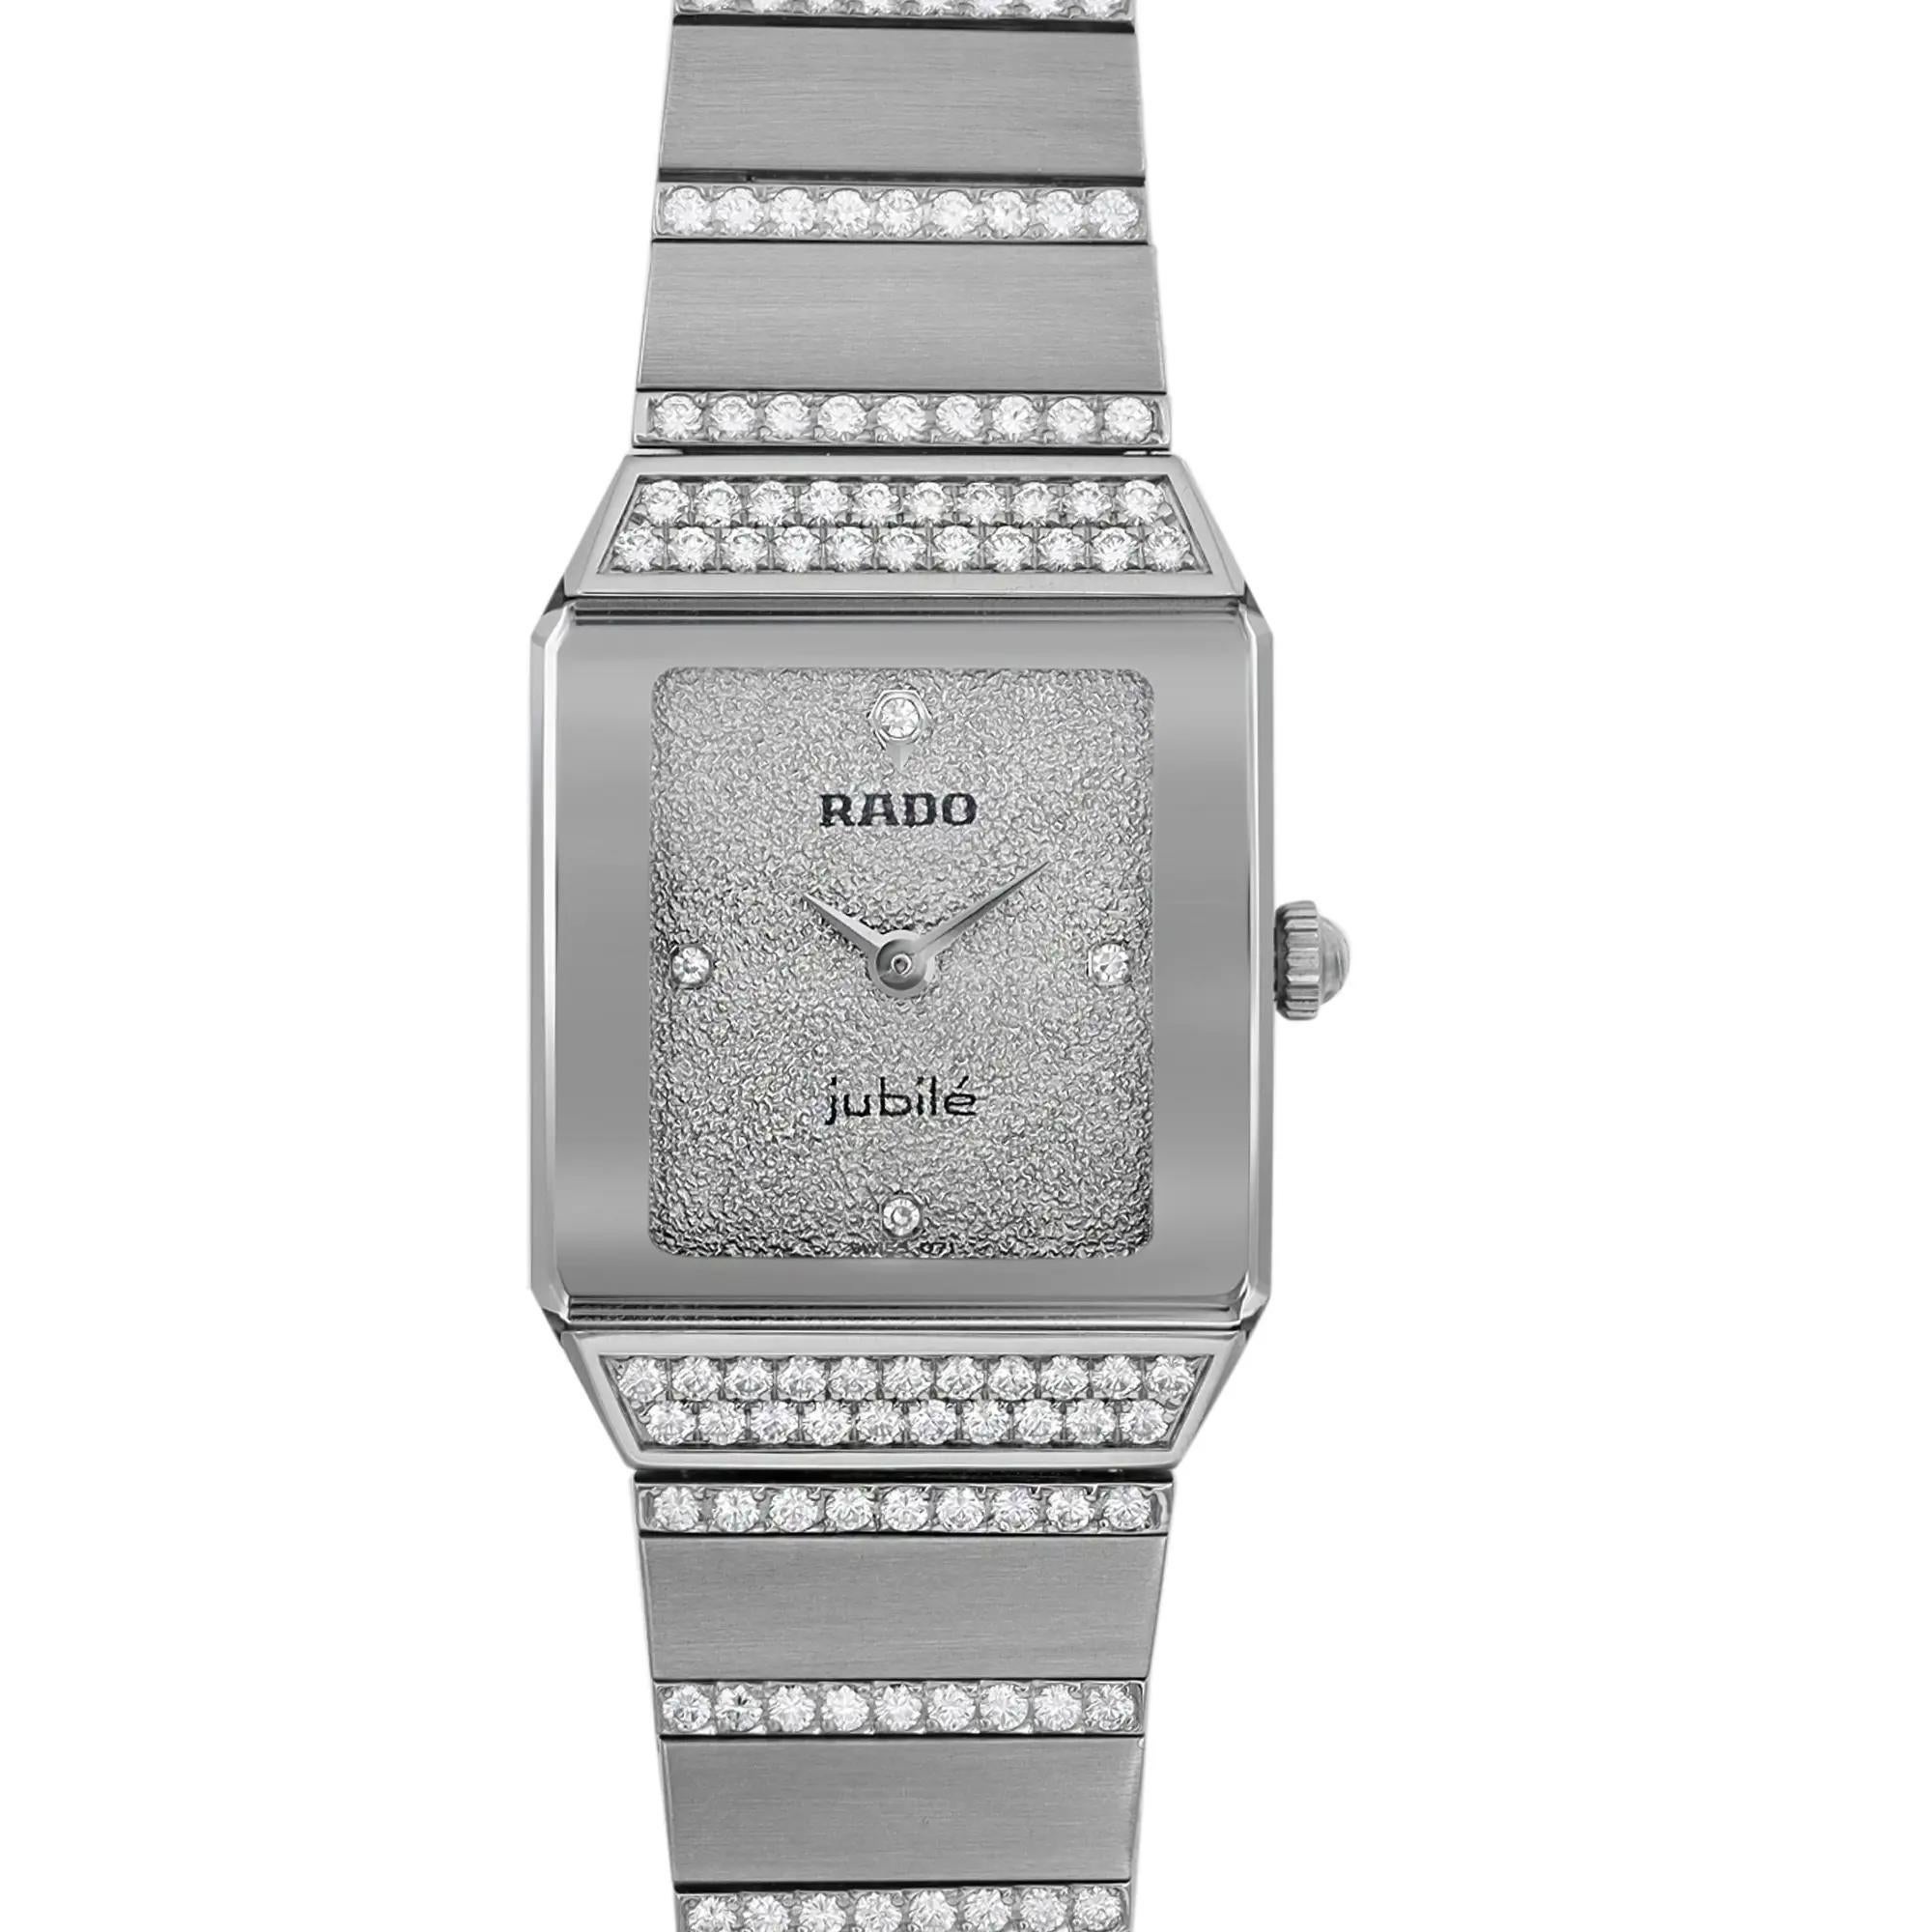 Unworn. Original Box and papers are included.

Brand Information:
Brand: Rado
Country/Region of Manufacture: Switzerland
Watch Type:

Type: Wristwatch
Department: Women
Style: Luxury

Model Information:
Model Number: R91168718
Model: Rado